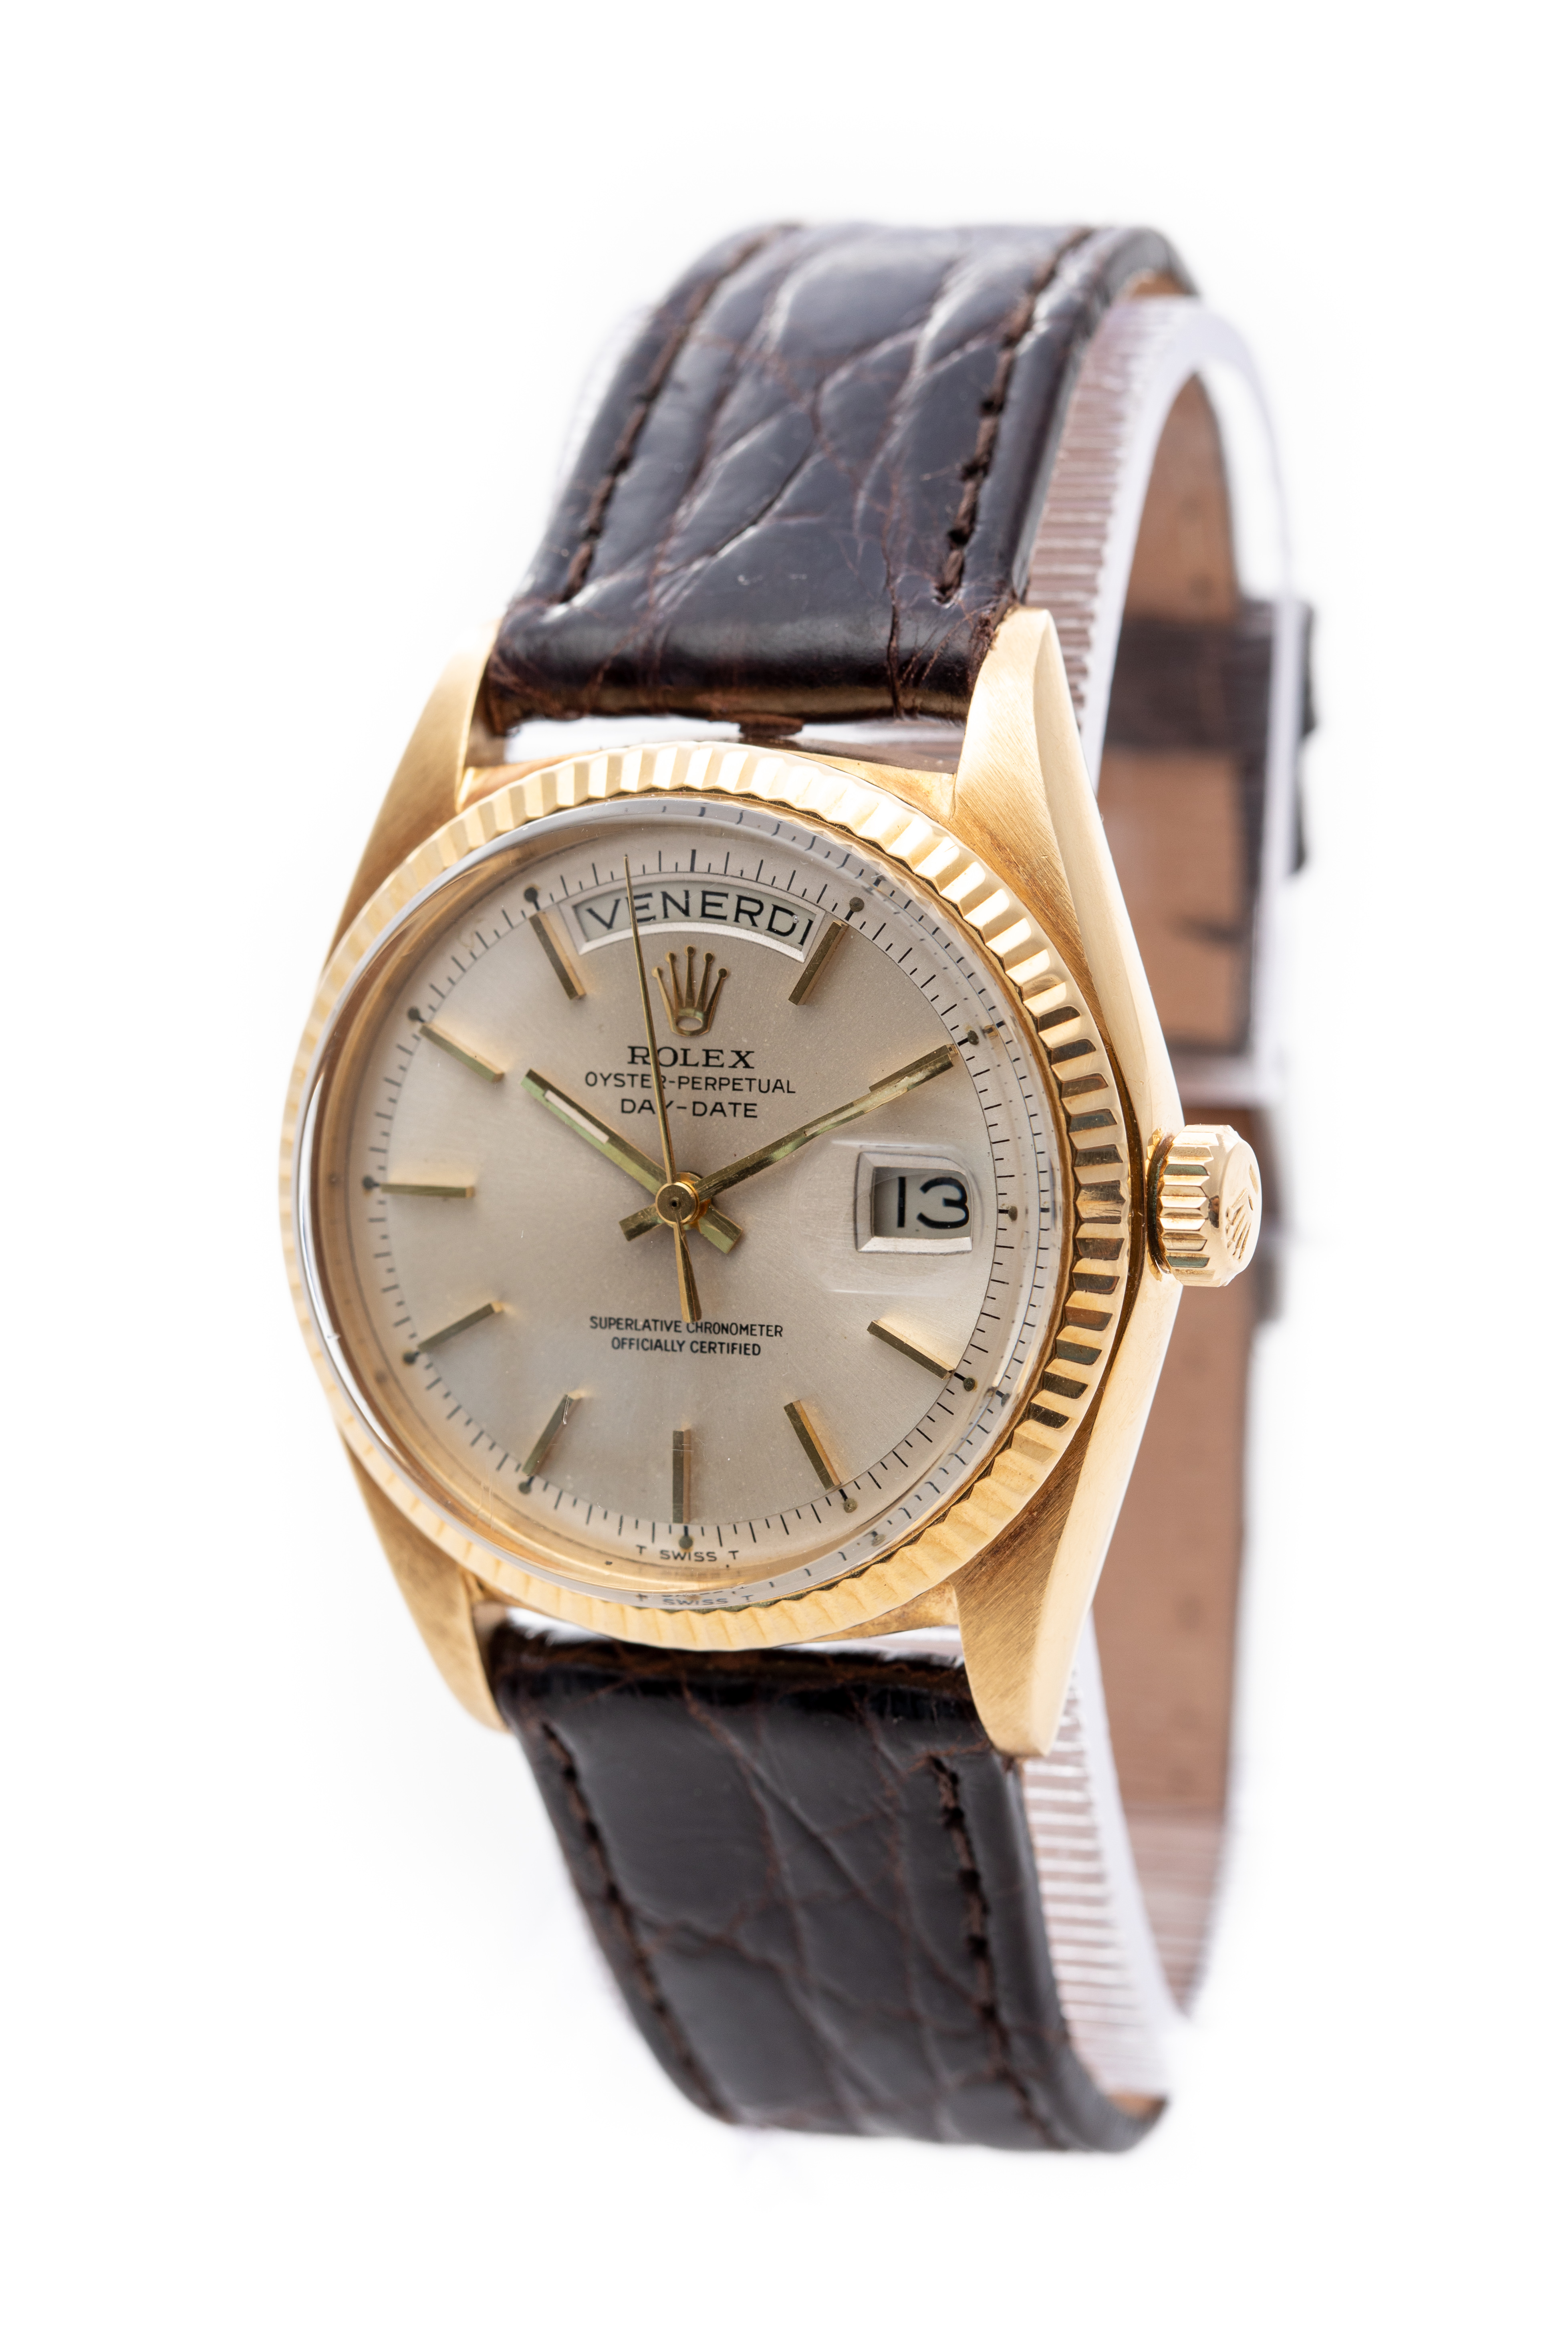 ROLEX DAY-DATE 36MM 18K YELLOW GOLD GOLD DIAL AUTOMATIC REF: 1803